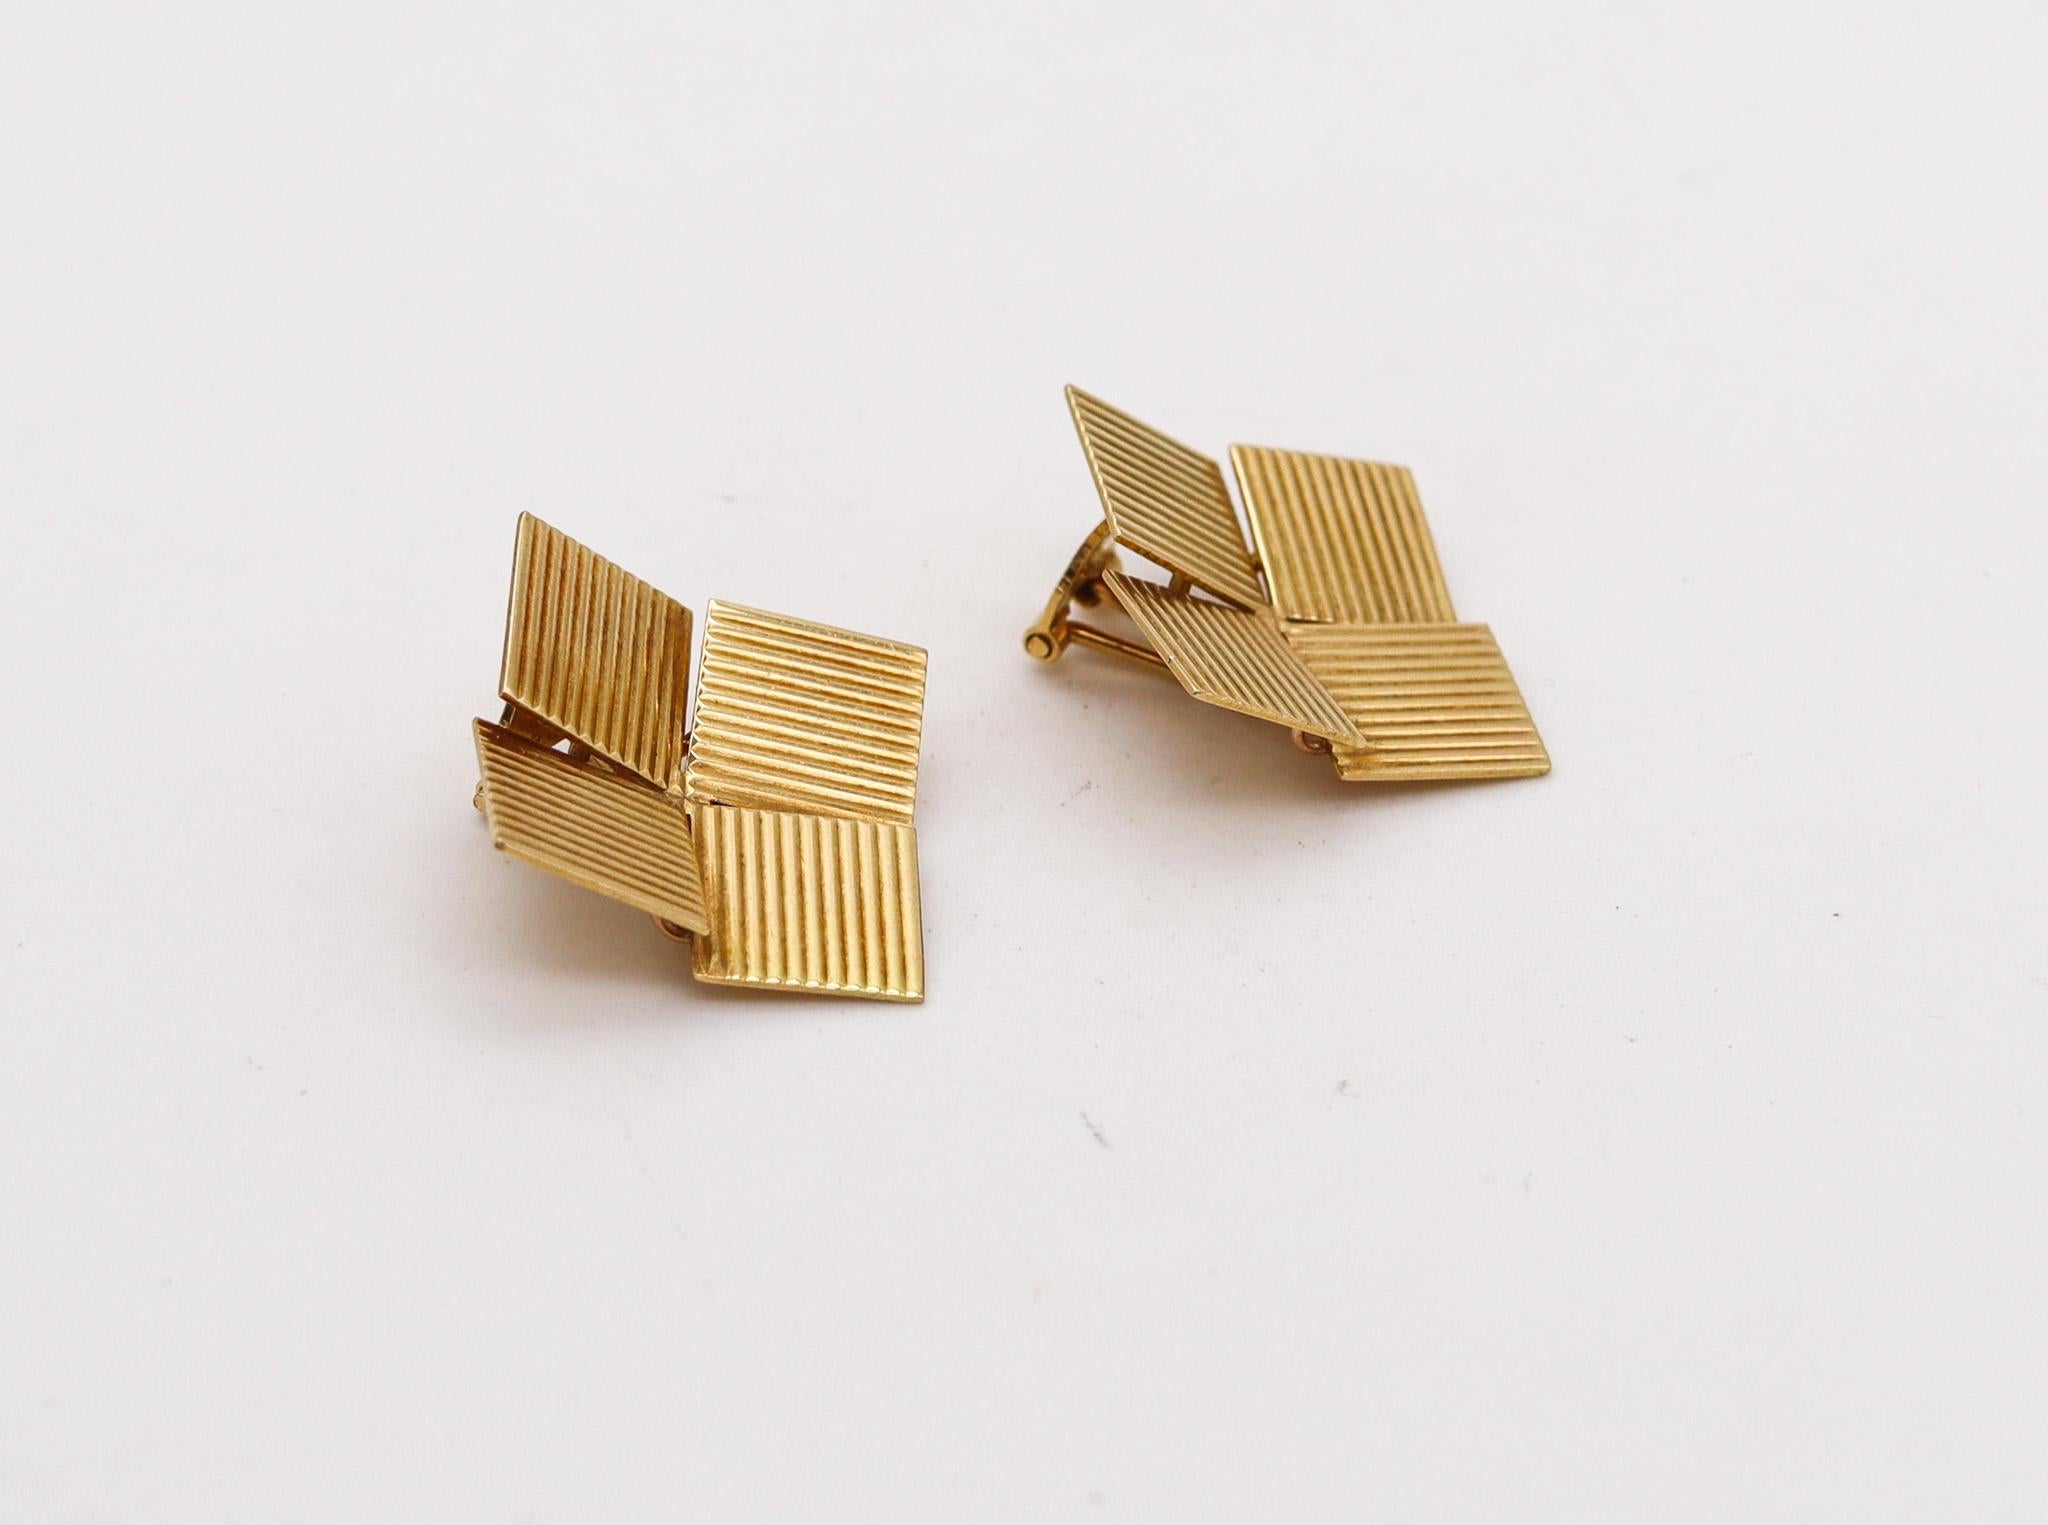 Modernist Italian 1970 Geometric Squares Clip on Earrings In Solid 18Kt Yellow Gold For Sale